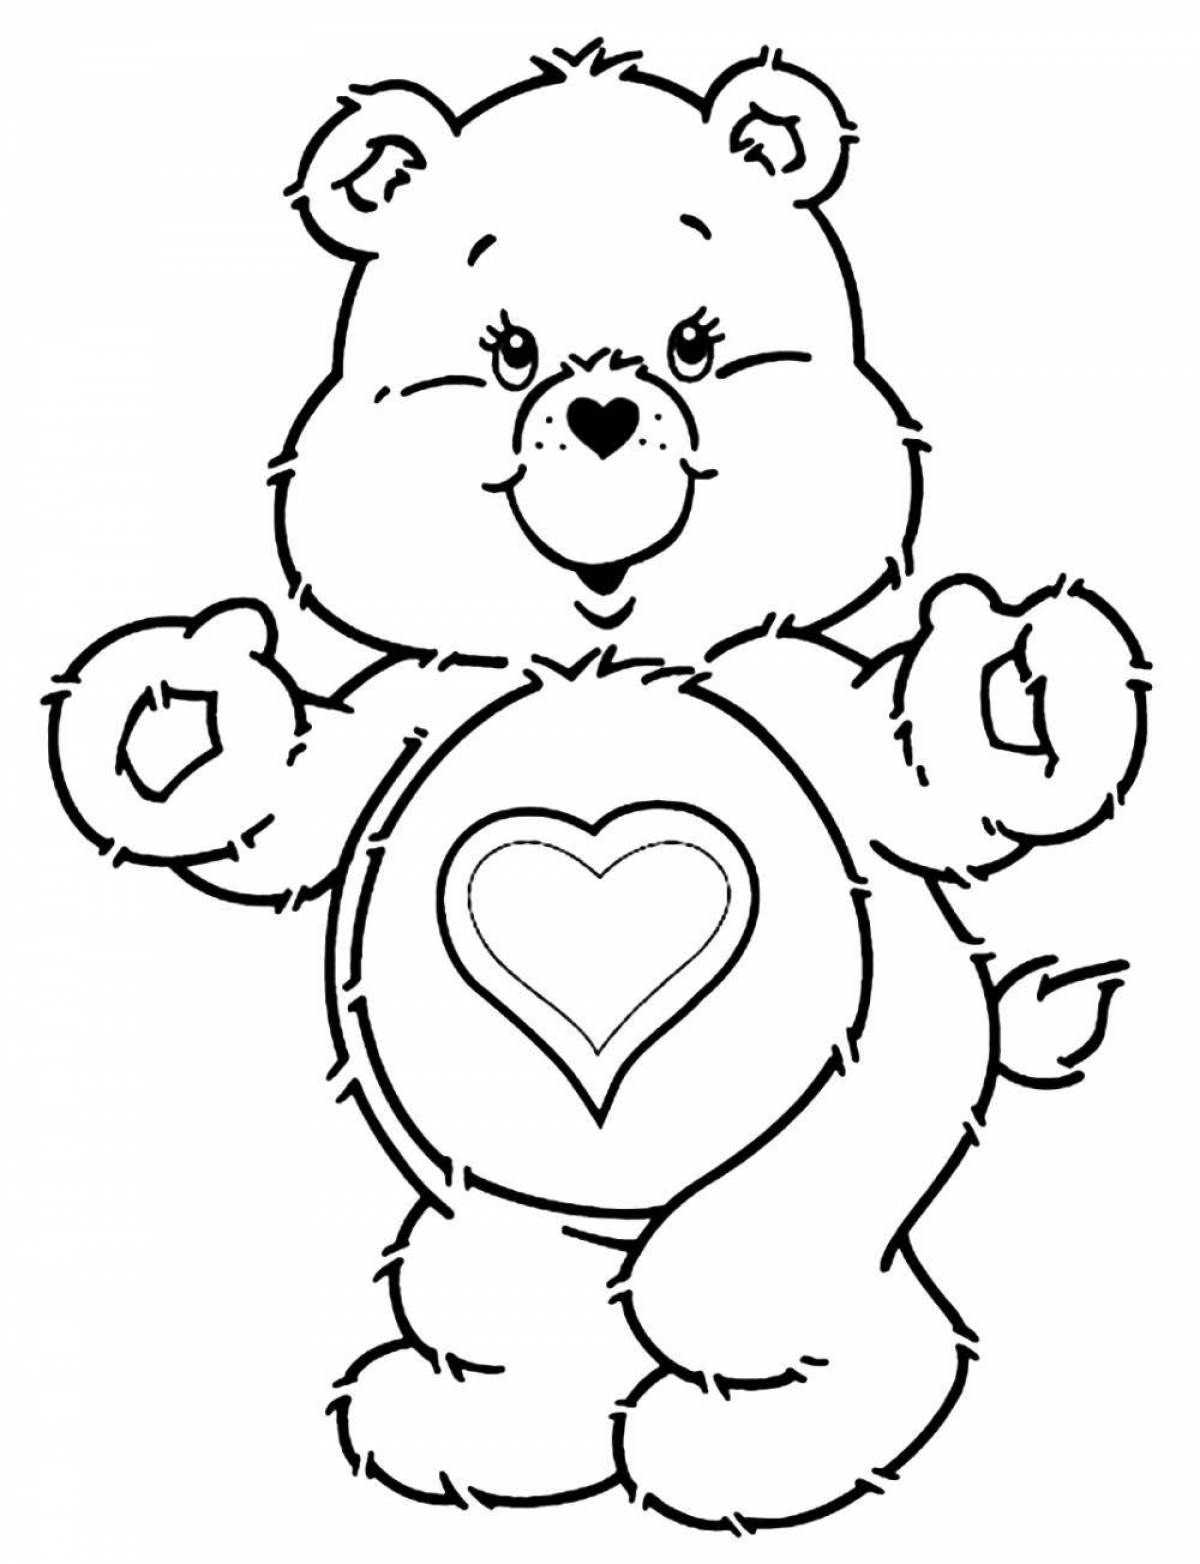 Coloring page mischievous bear with a heart